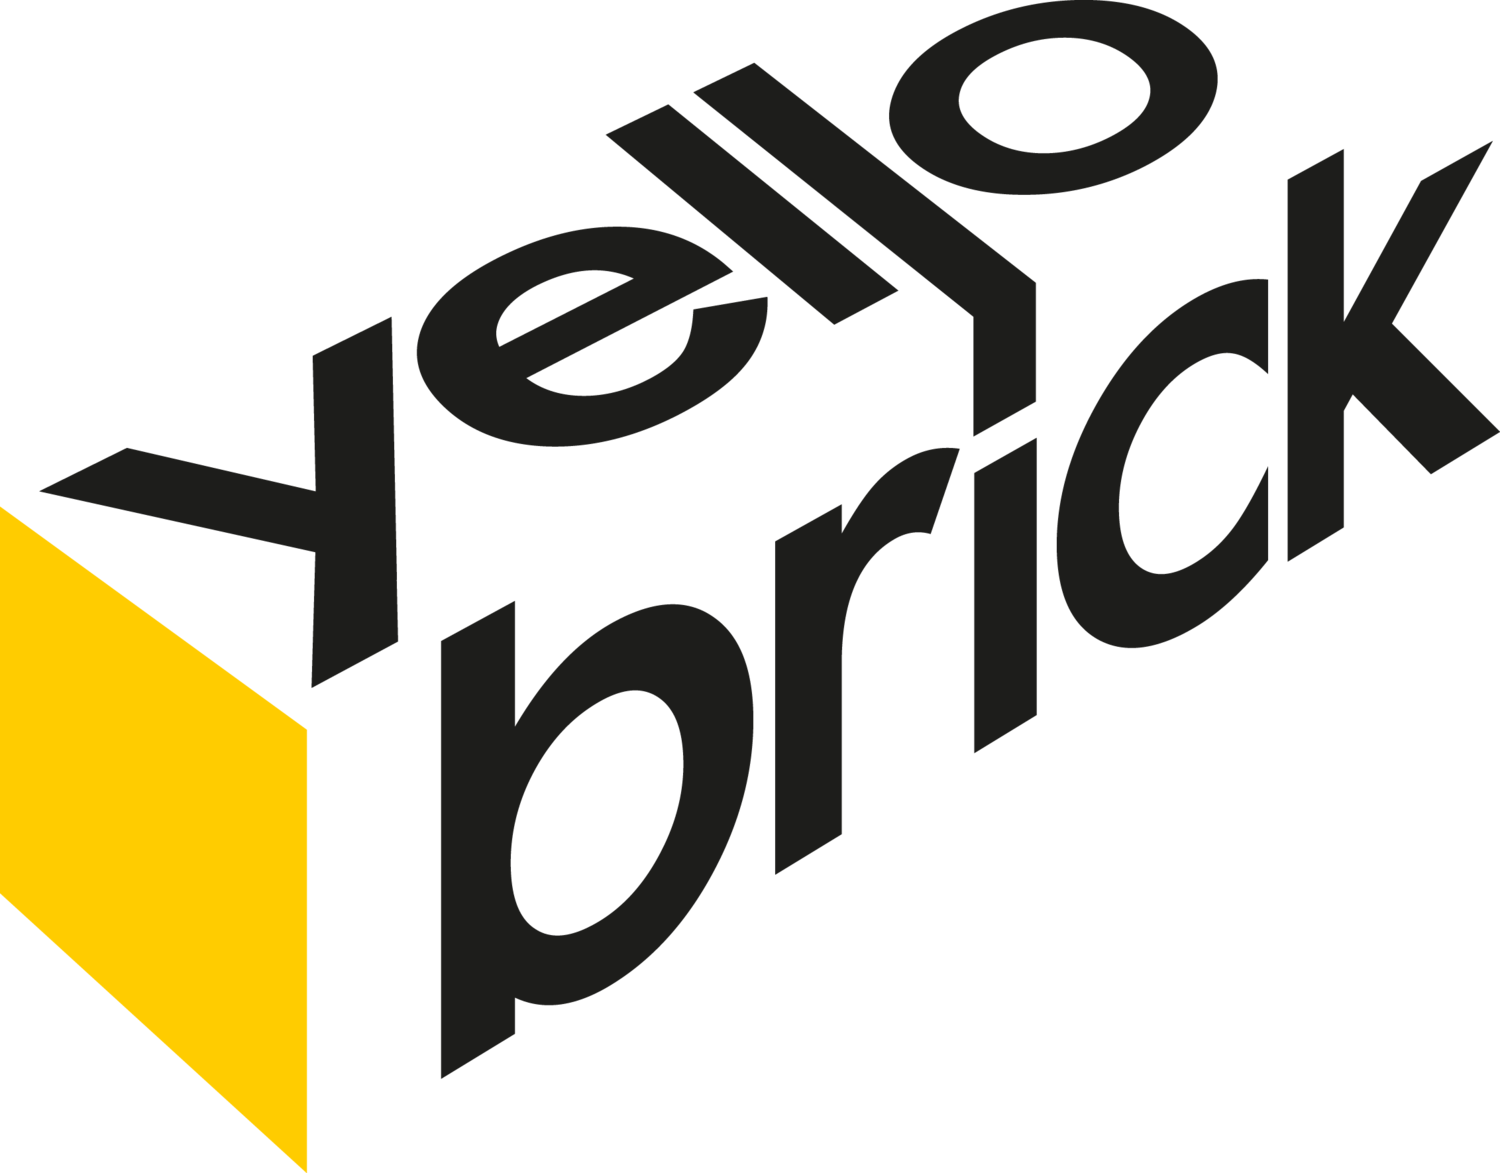 text in black Yello Brick with a yellow rectangle to left of text